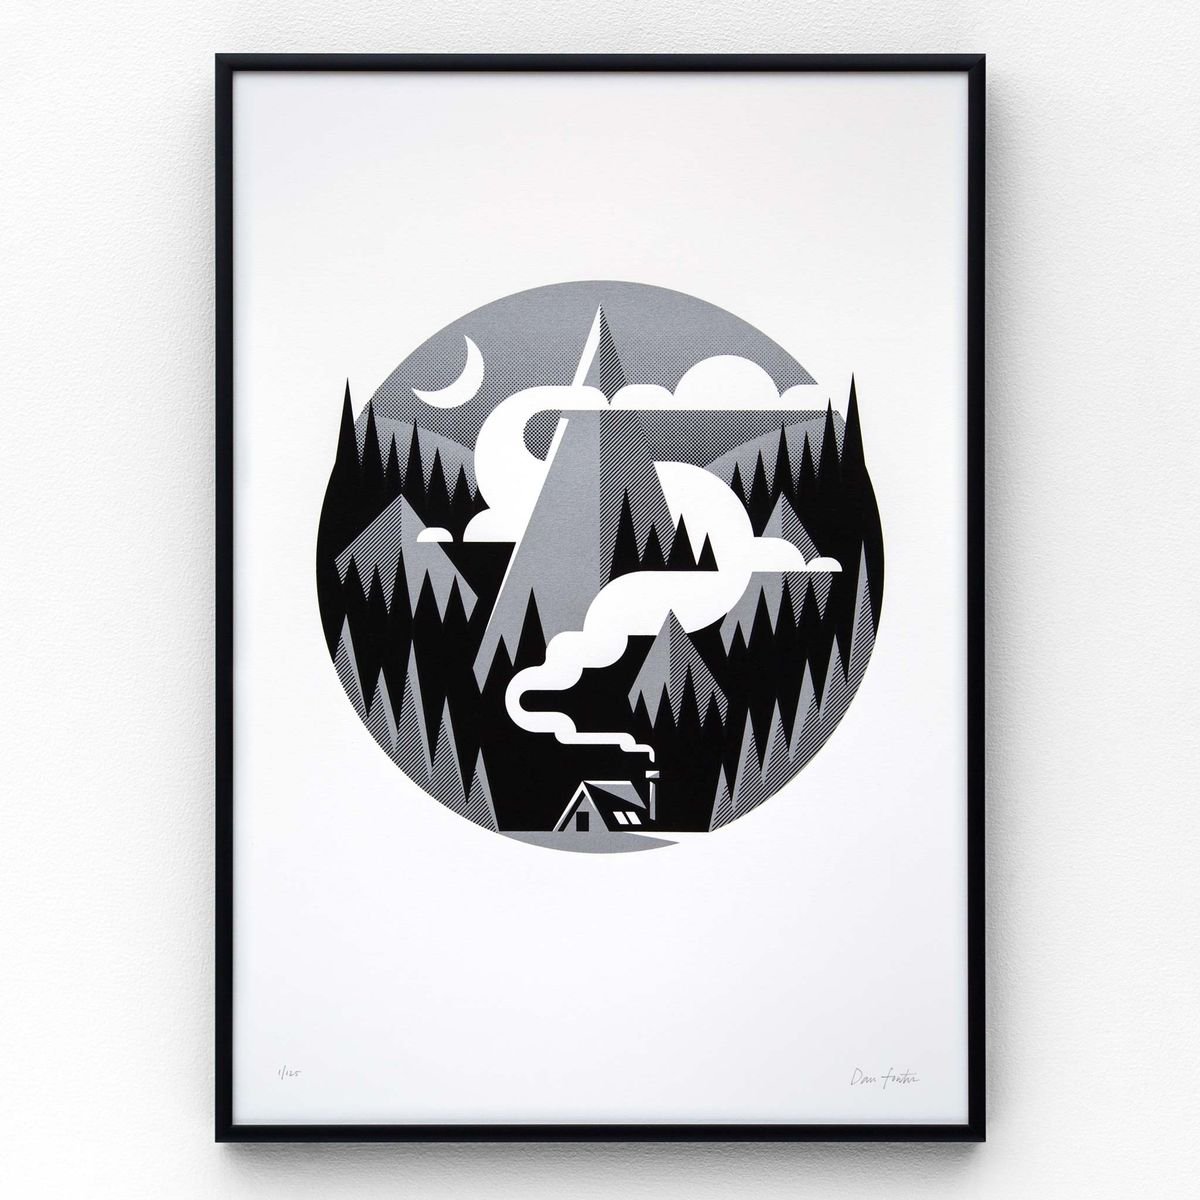 Hideaway A3 limited edition screen print by The Lost Fox